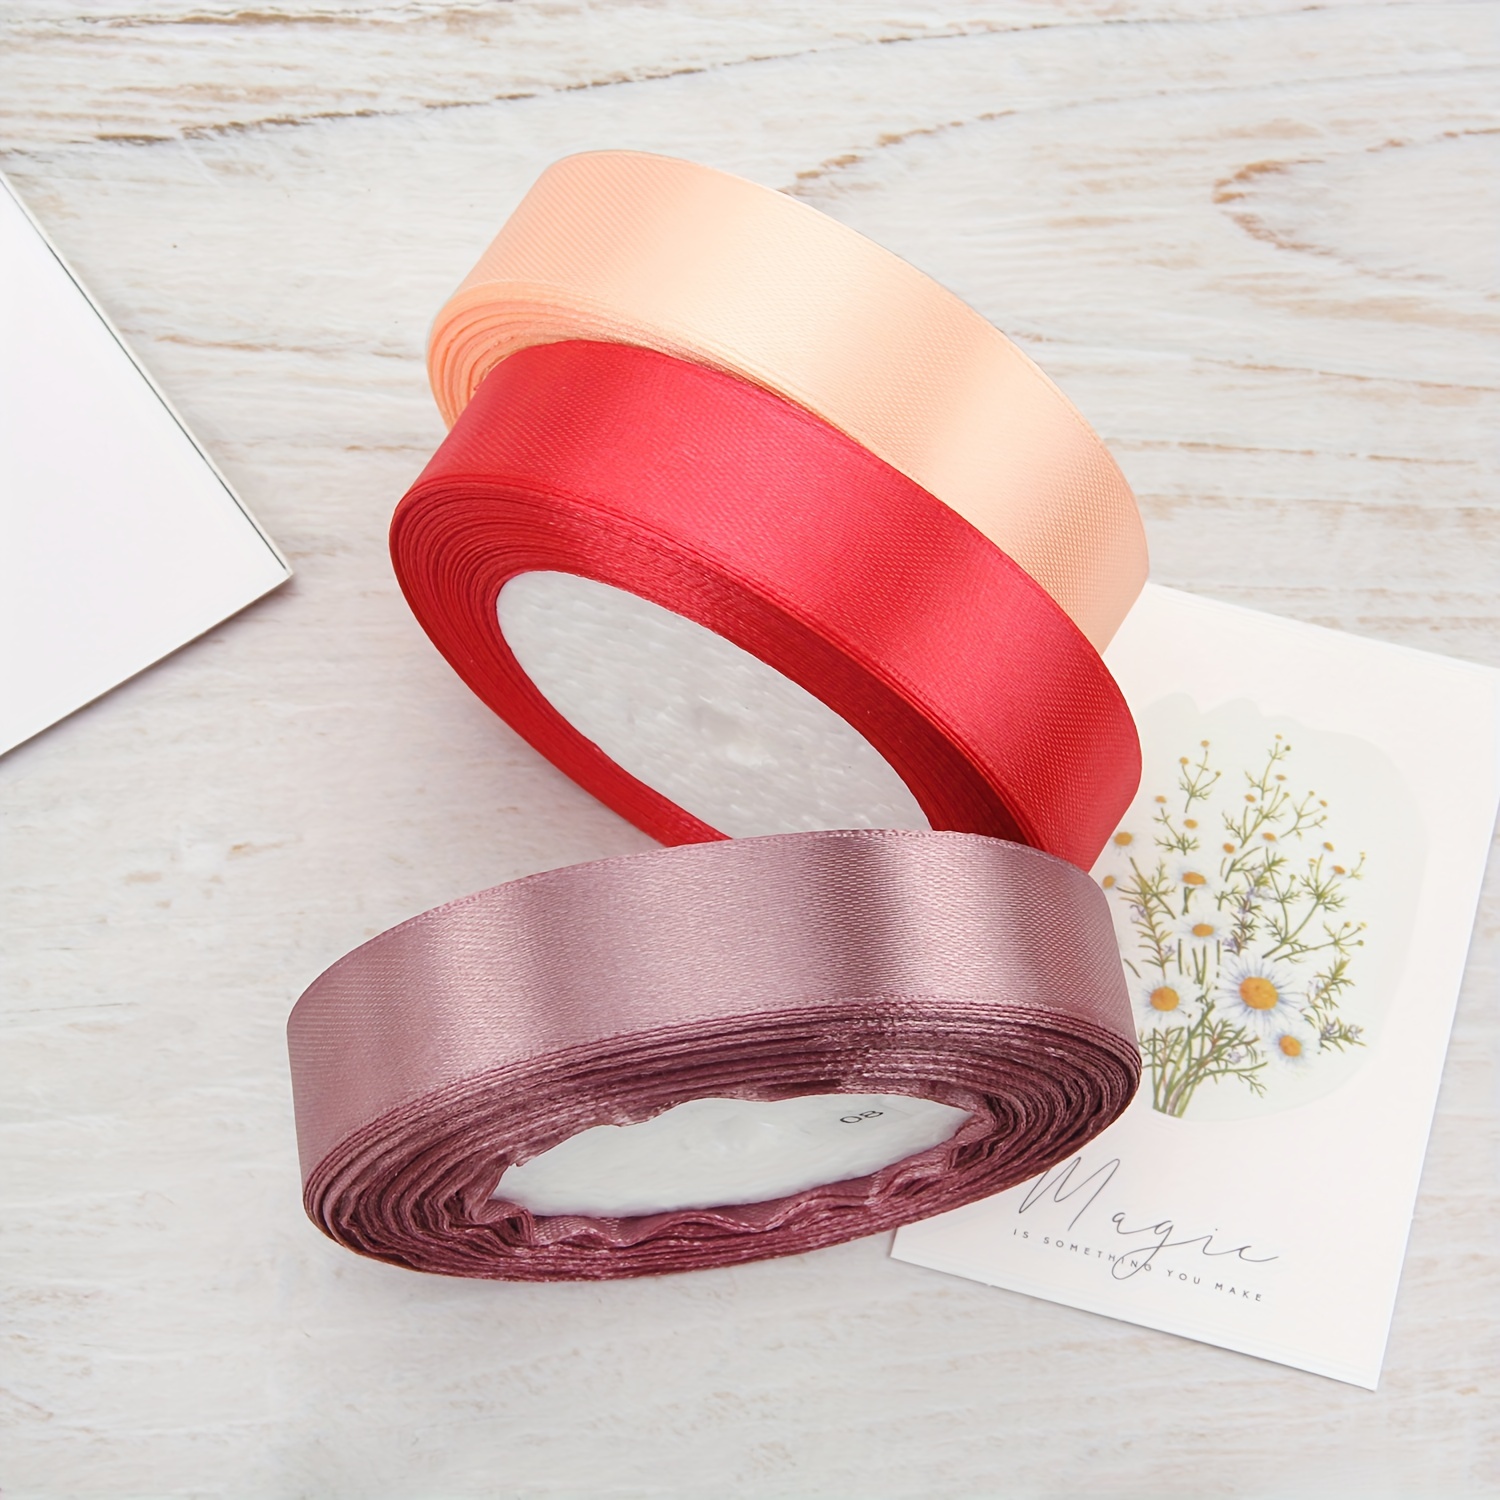 WHZKCYH Pink Satin Ribbon 1 Pink Ribbon for Gift Wrapping Crafts Flower  Bouquet Wedding Invitations Birthday Party Decoration, 6 Rolls Assortment,  25